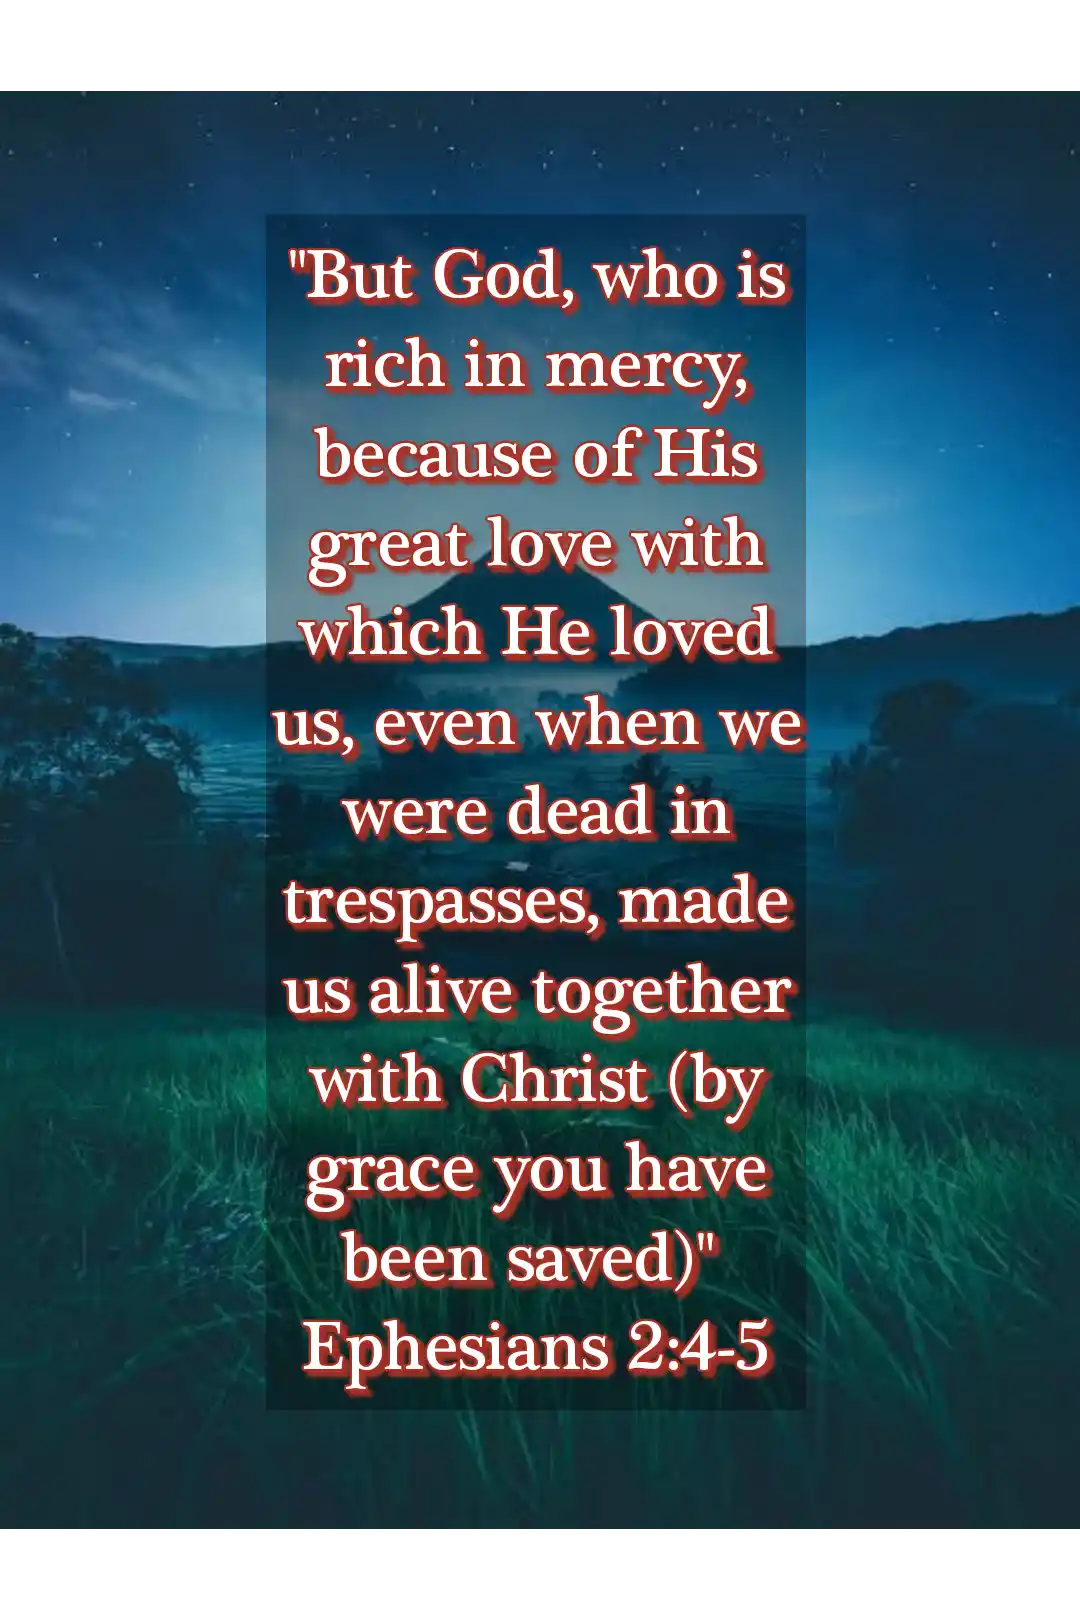 Bible verses about god’s love for us (Ephesians 2:4-5)